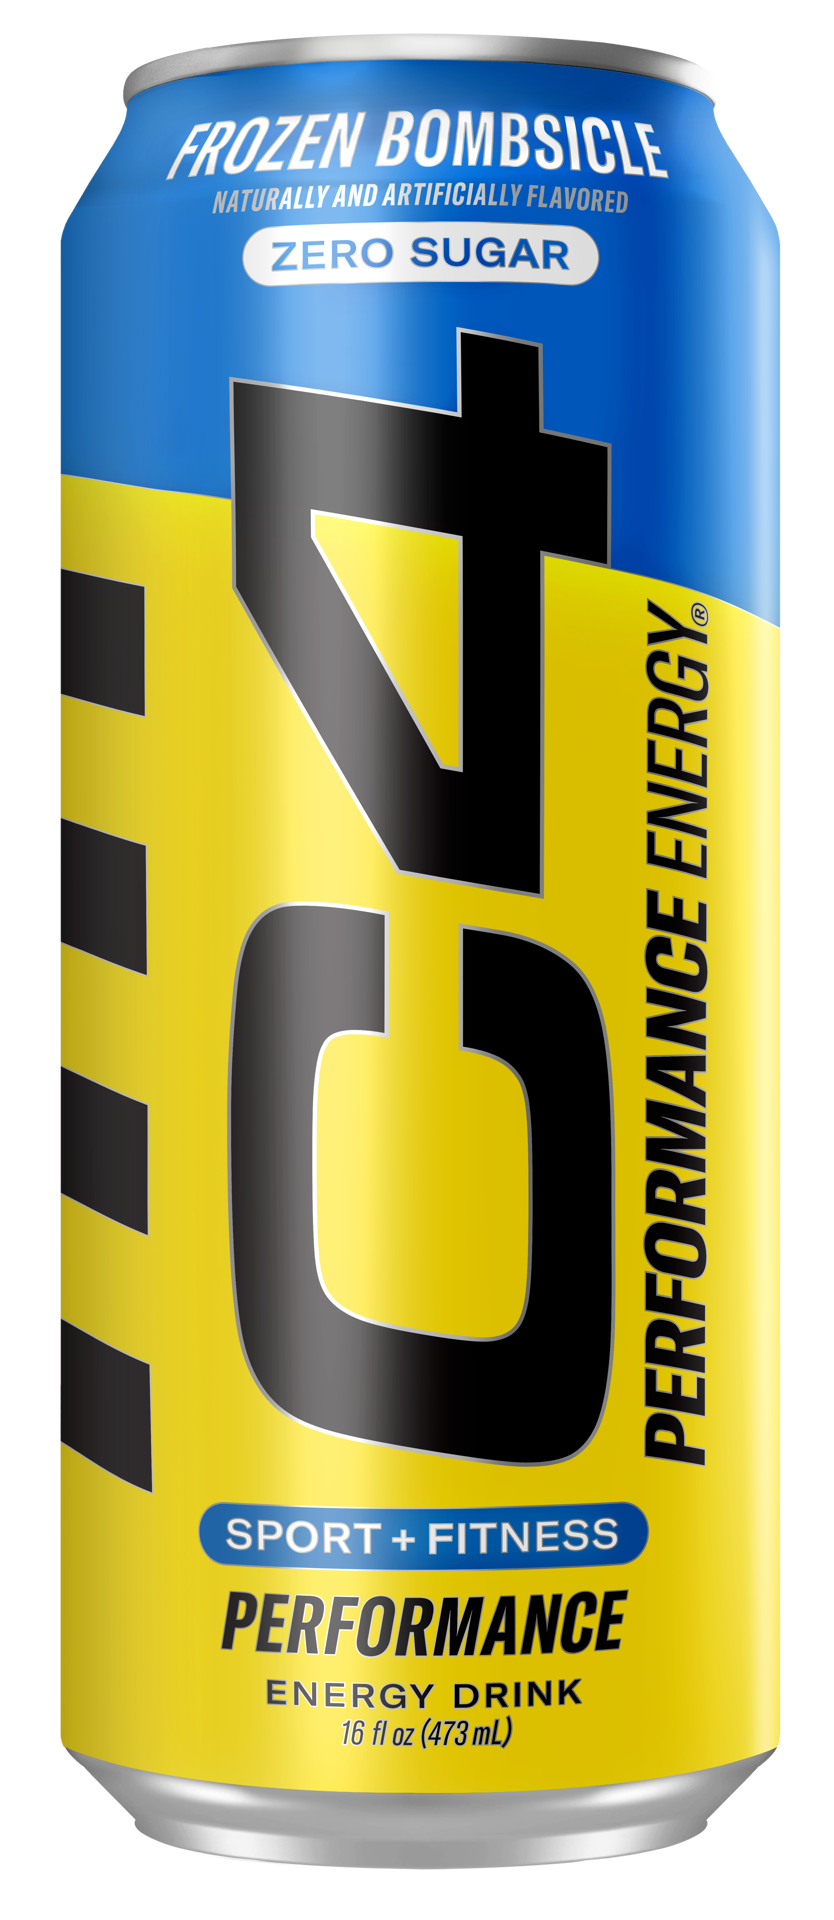 slide 1 of 9, C4 Energy, C4 Energy - Yellow Can, Carbonated, Frozen Bombsicle, 16 oz